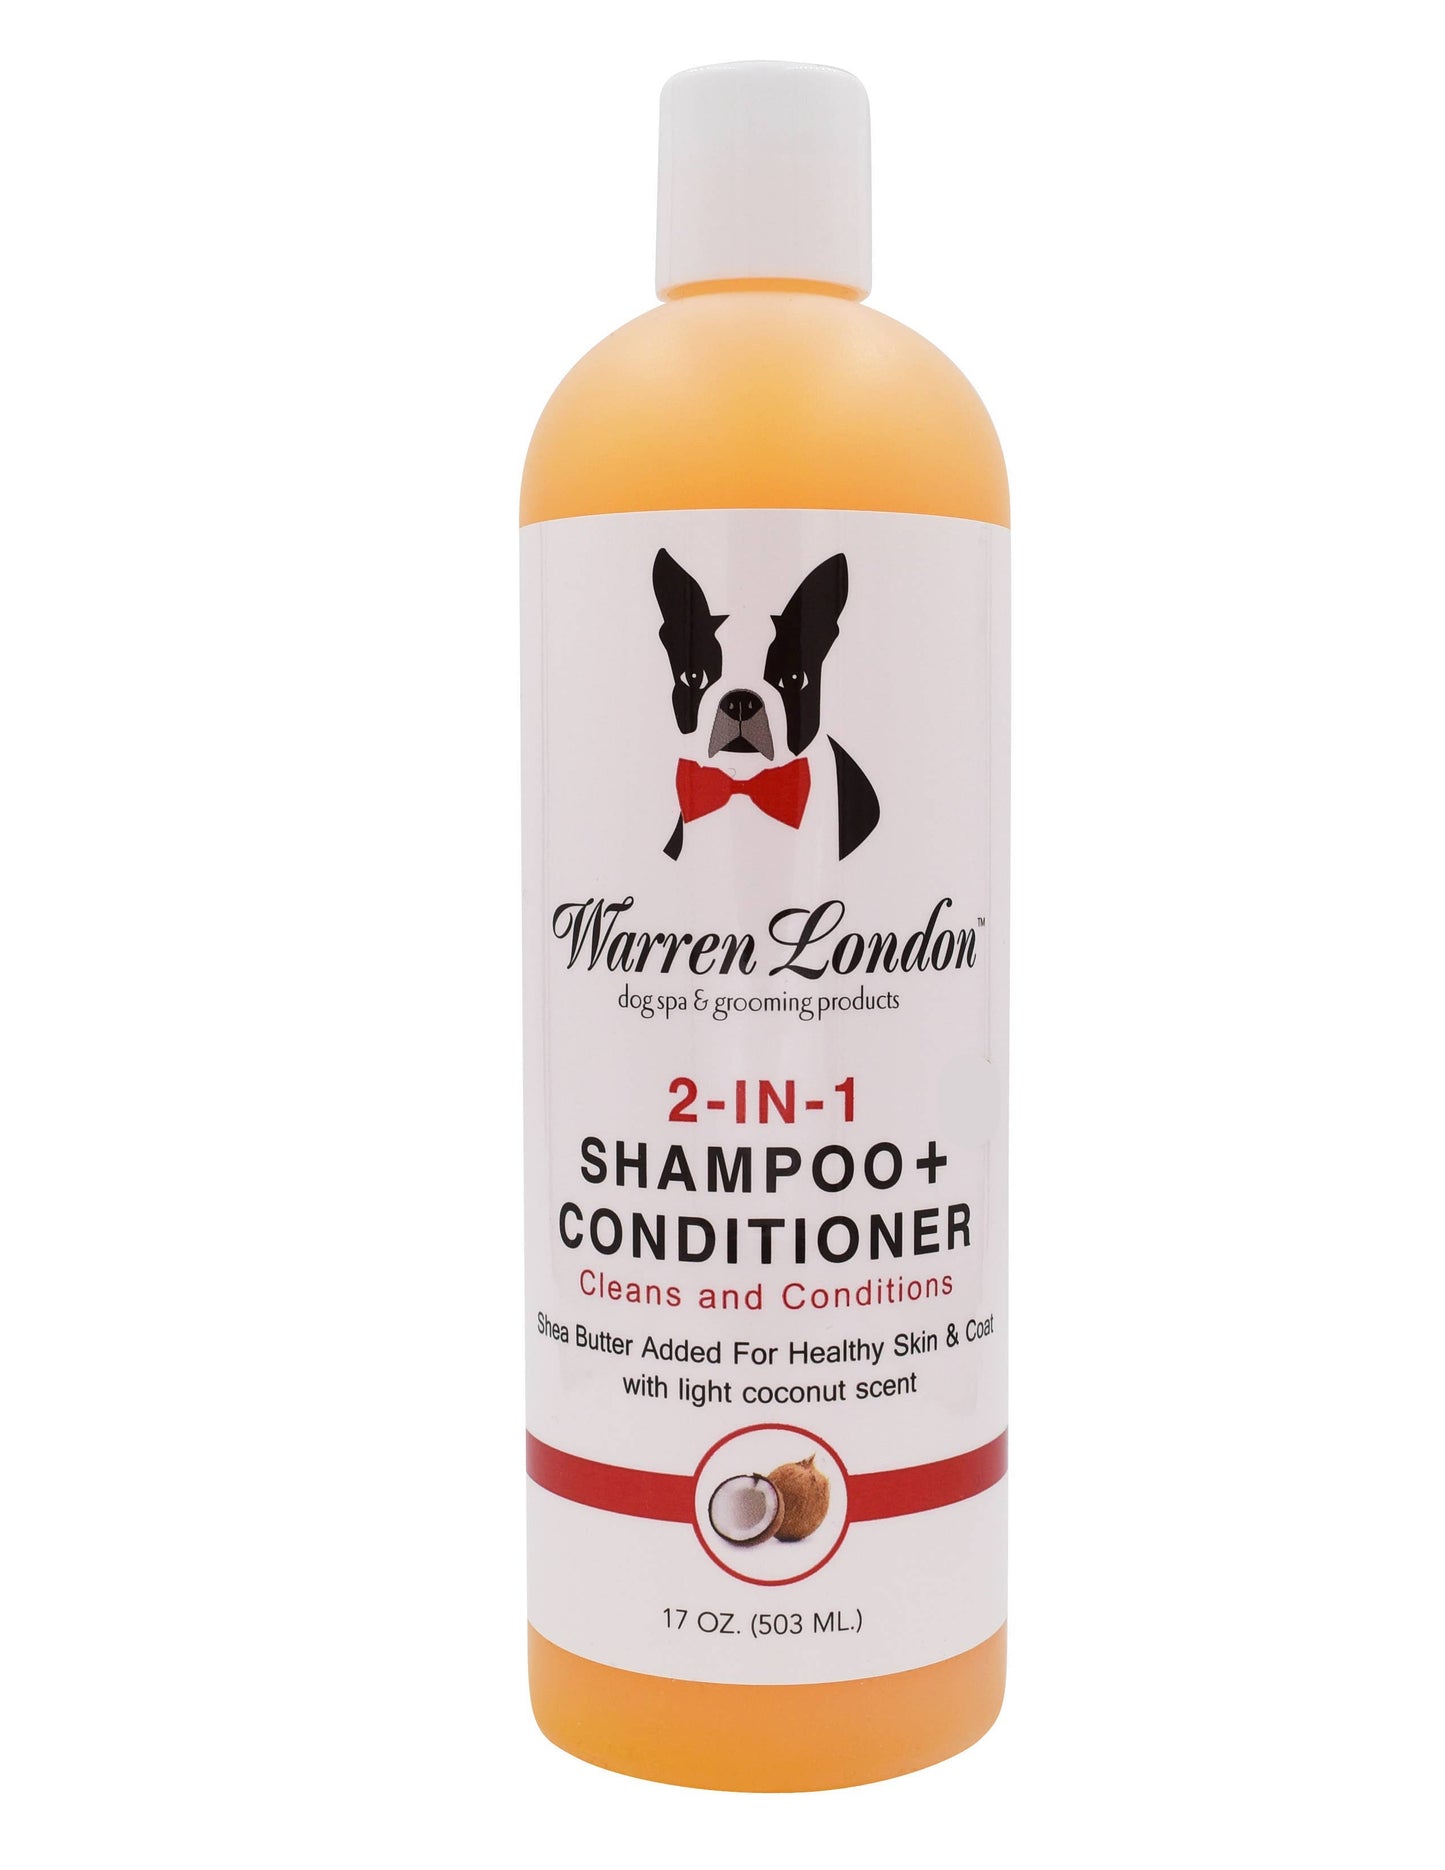 Warren London Dog Products - Shampoo: 2in1 plus Conditioner - 2 Sizes 17oz Image